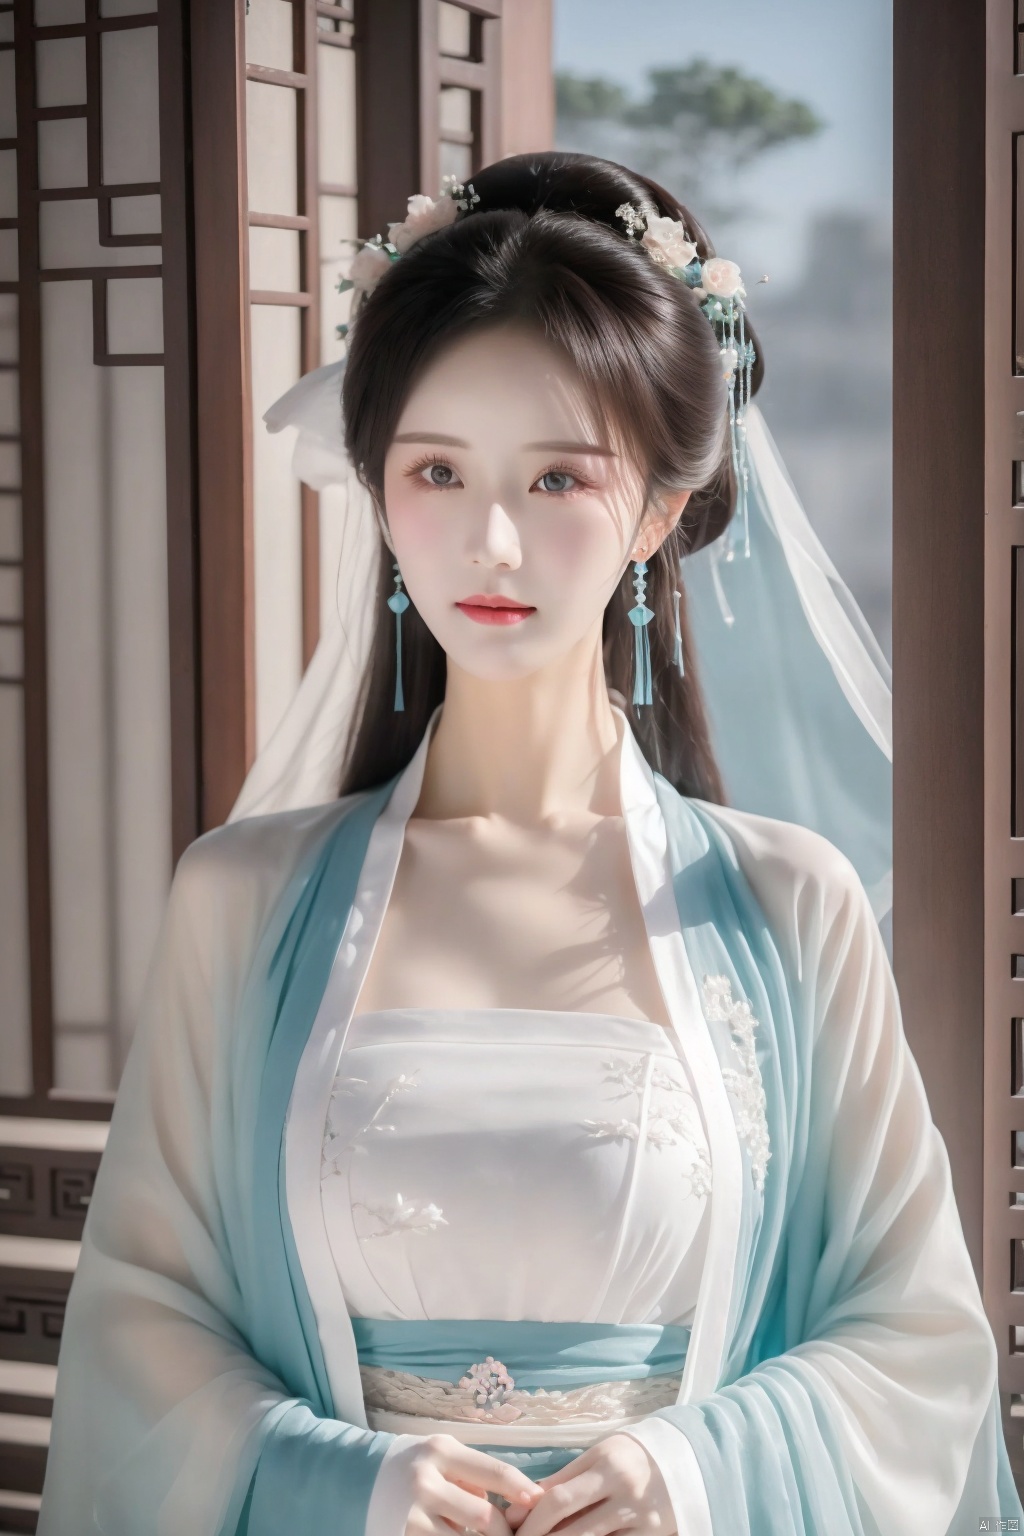  1 bride,25岁,Chinese ice crystal diamond earrings,be richly attired and heavily made-upEye shadow,blusher,Dress,chest,be shy,Hanfu,(clothes),streamer,Transparent coat,(gauze headscarf）